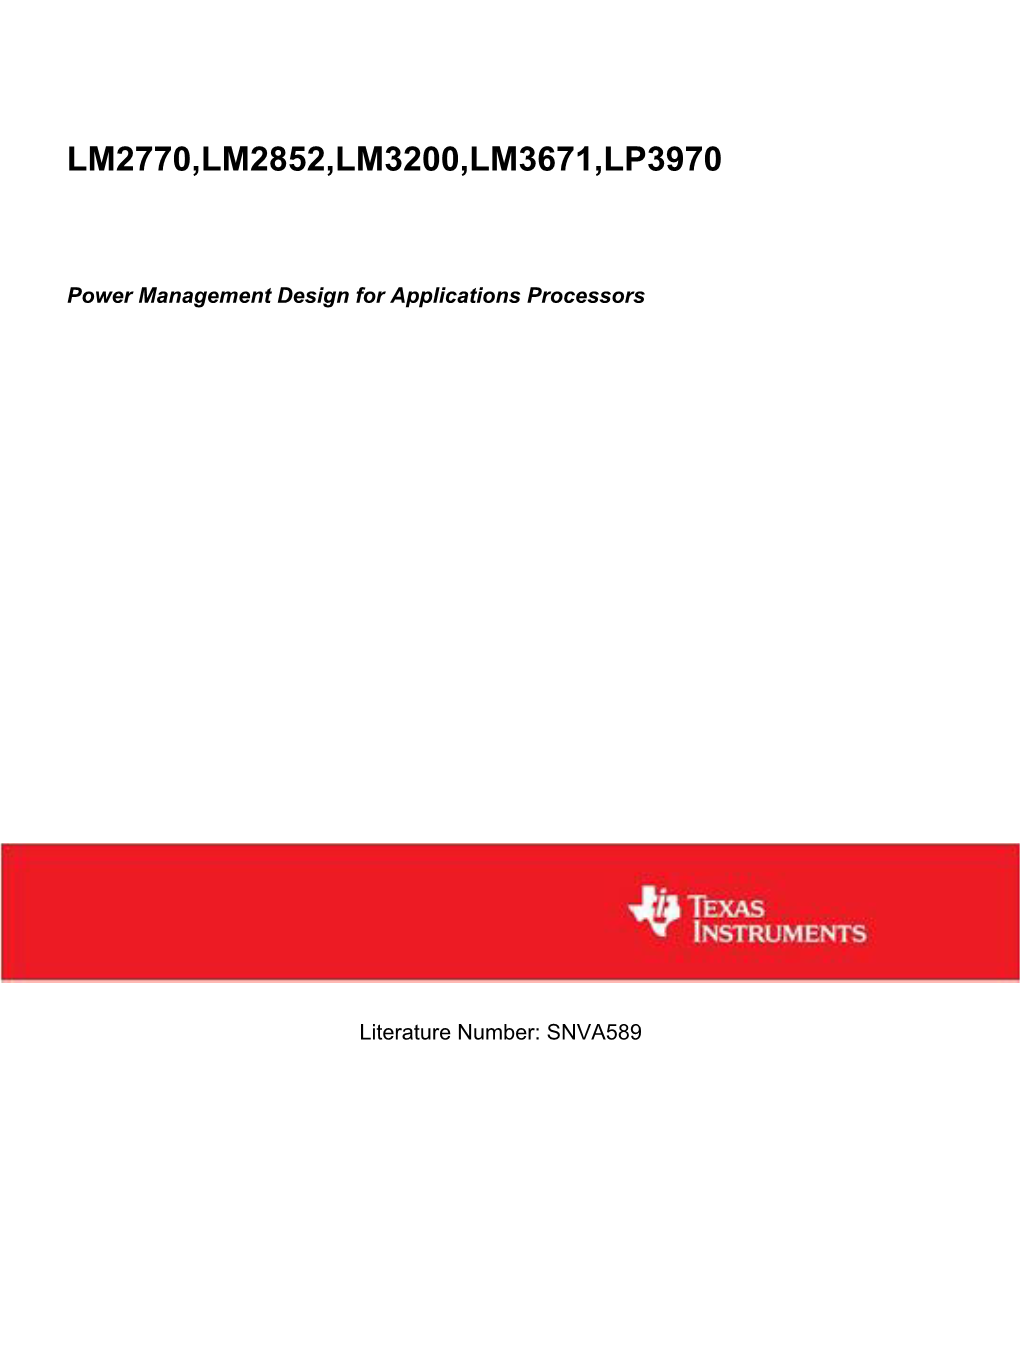 Power Management Design for Applications Processors